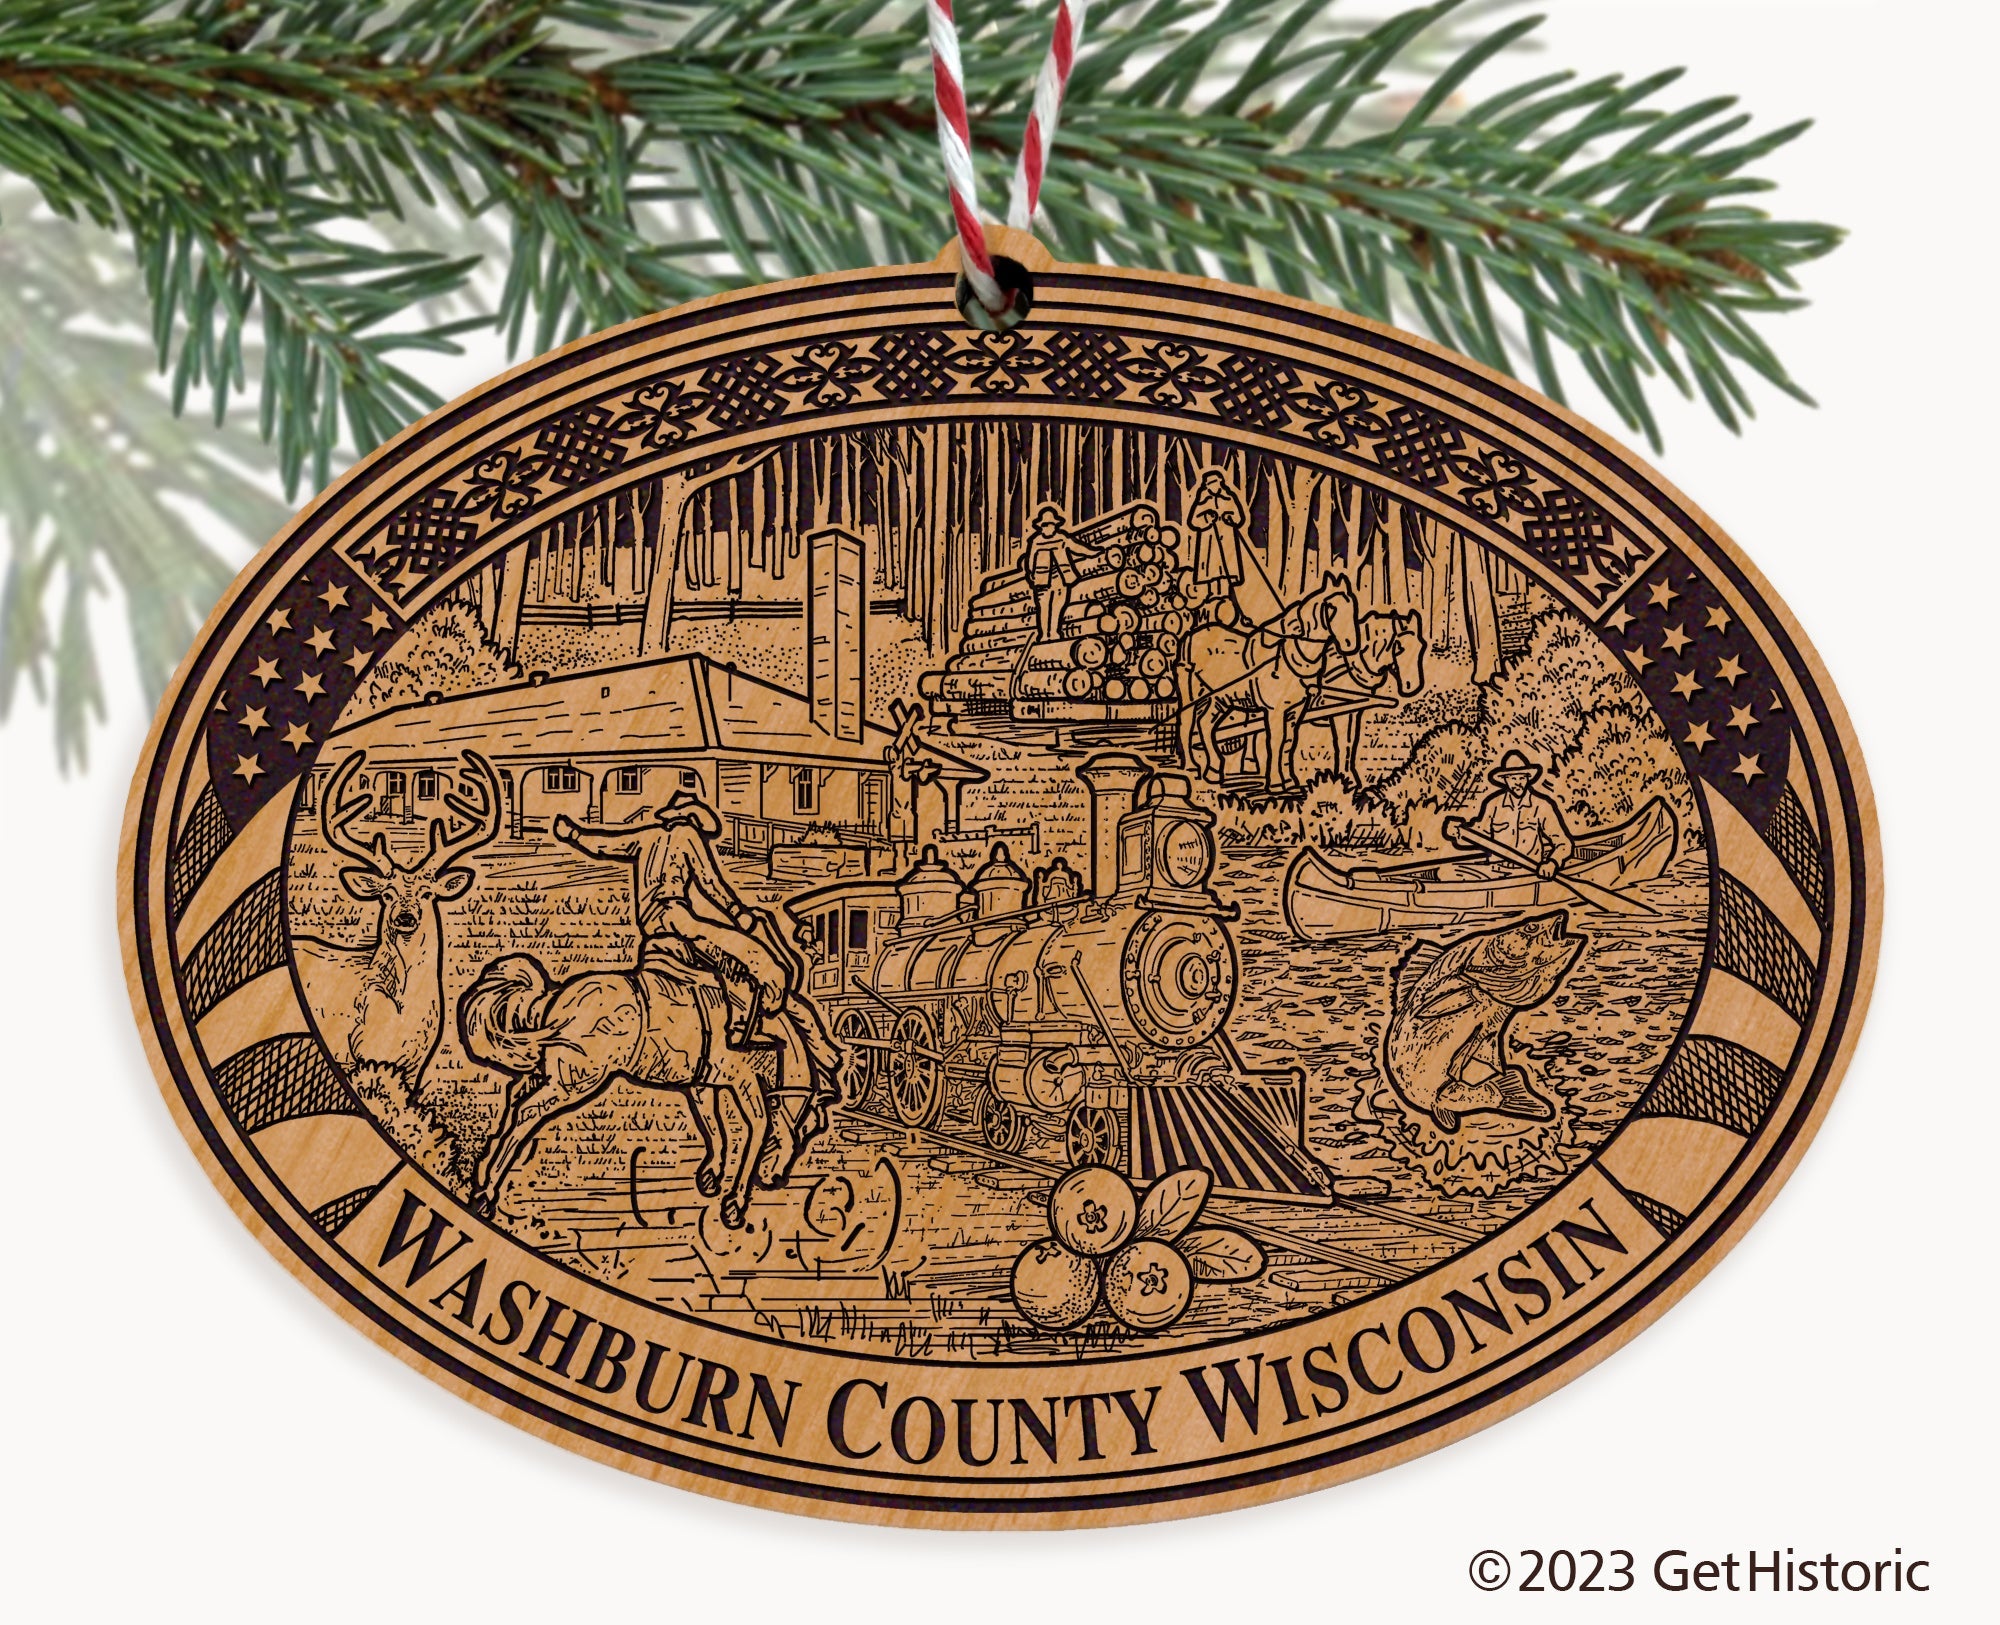 Washburn County Wisconsin Engraved Natural Ornament